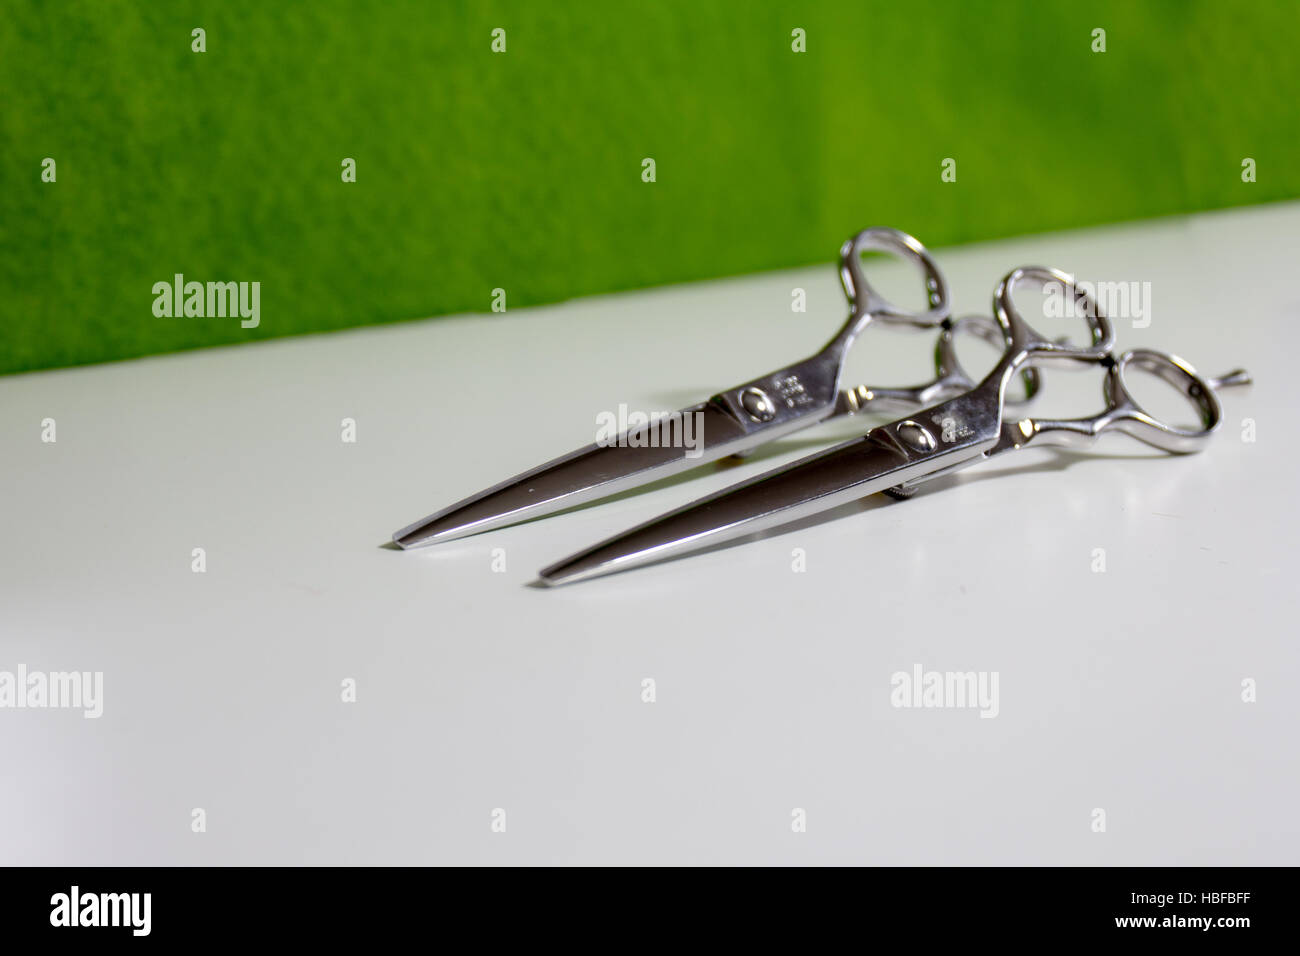 Two silver scissors for cutting hair Stock Photo